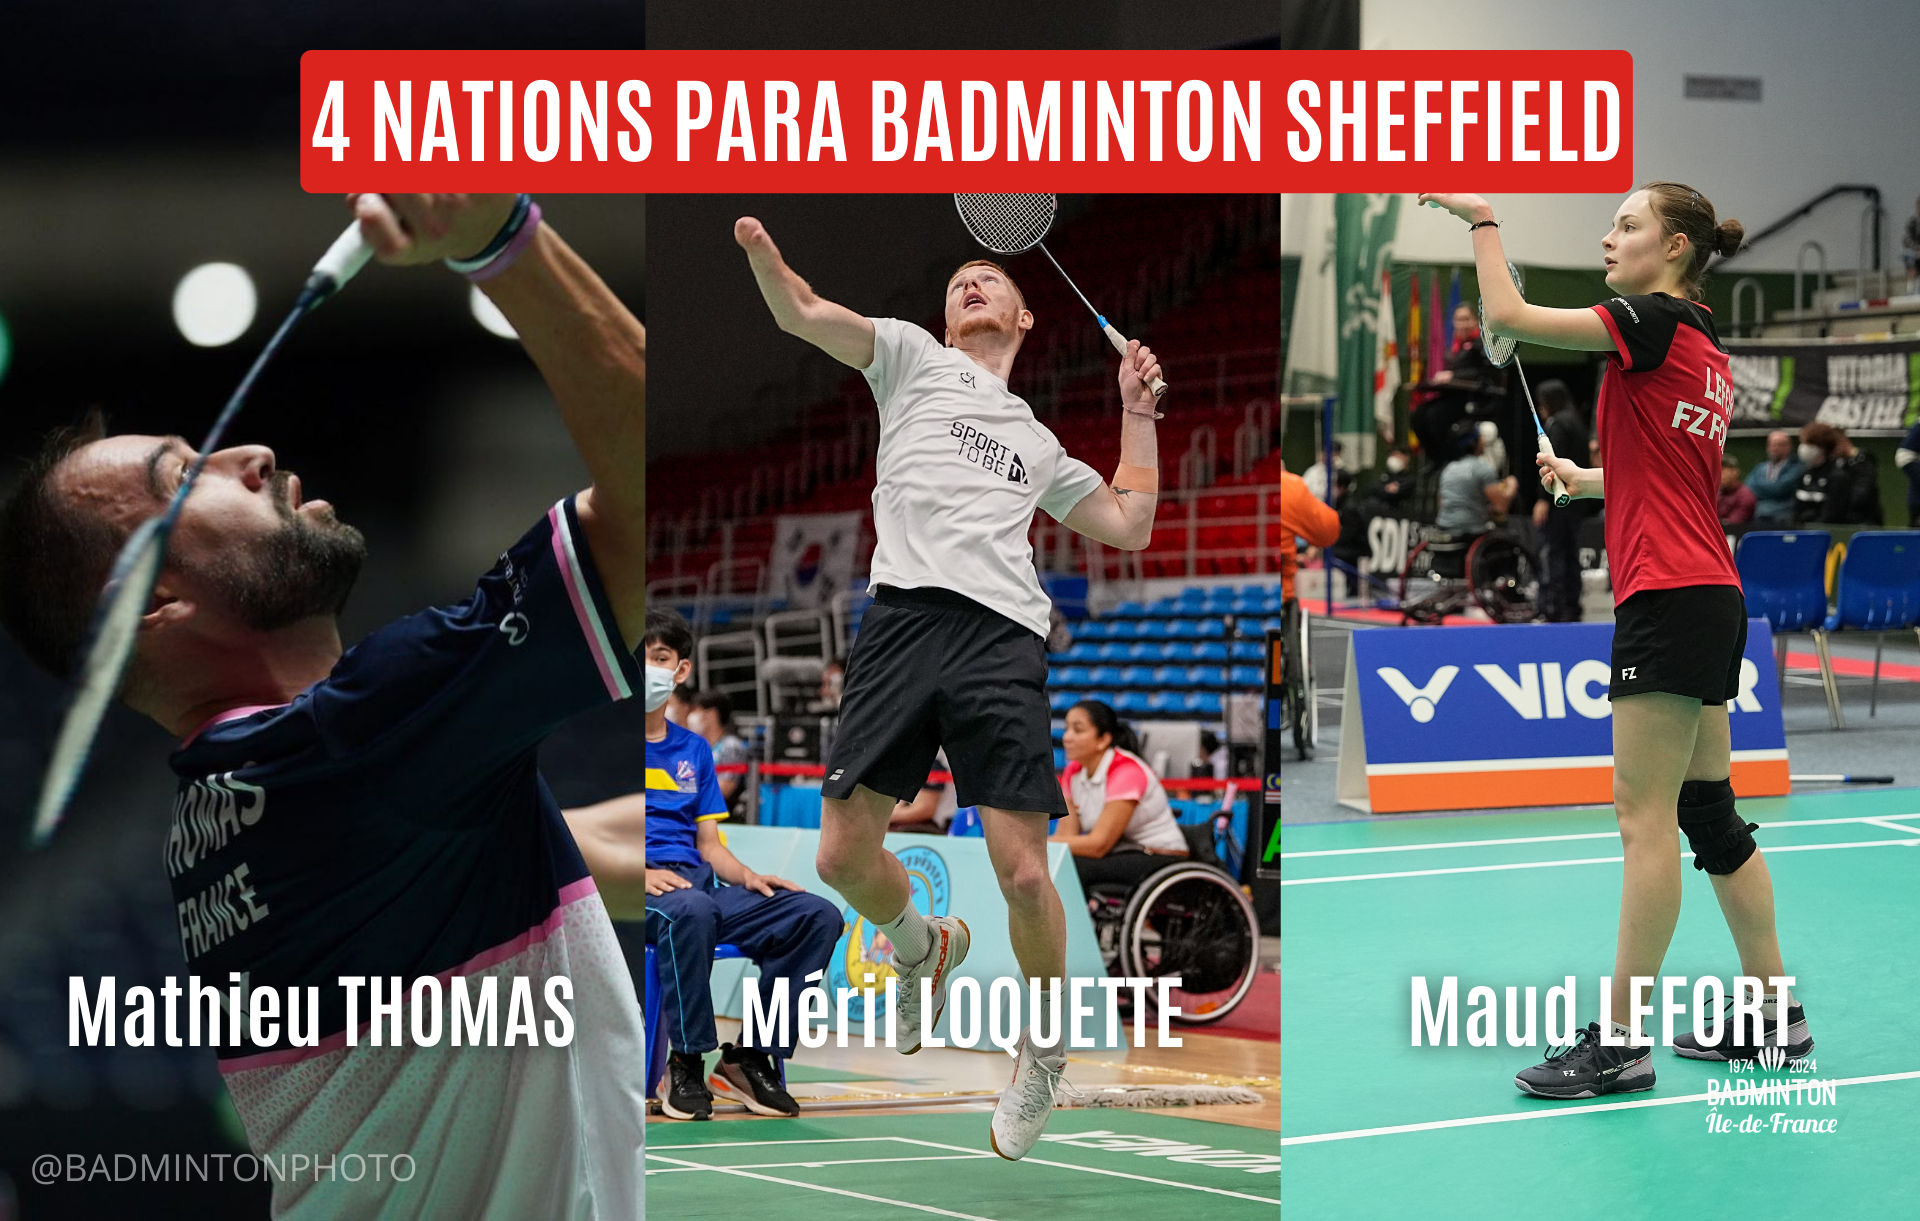 https://www.lifb.org/wp-content/uploads/2023/08/02-4-Nations-Para-Badminton-Sheffield-Facebook.png